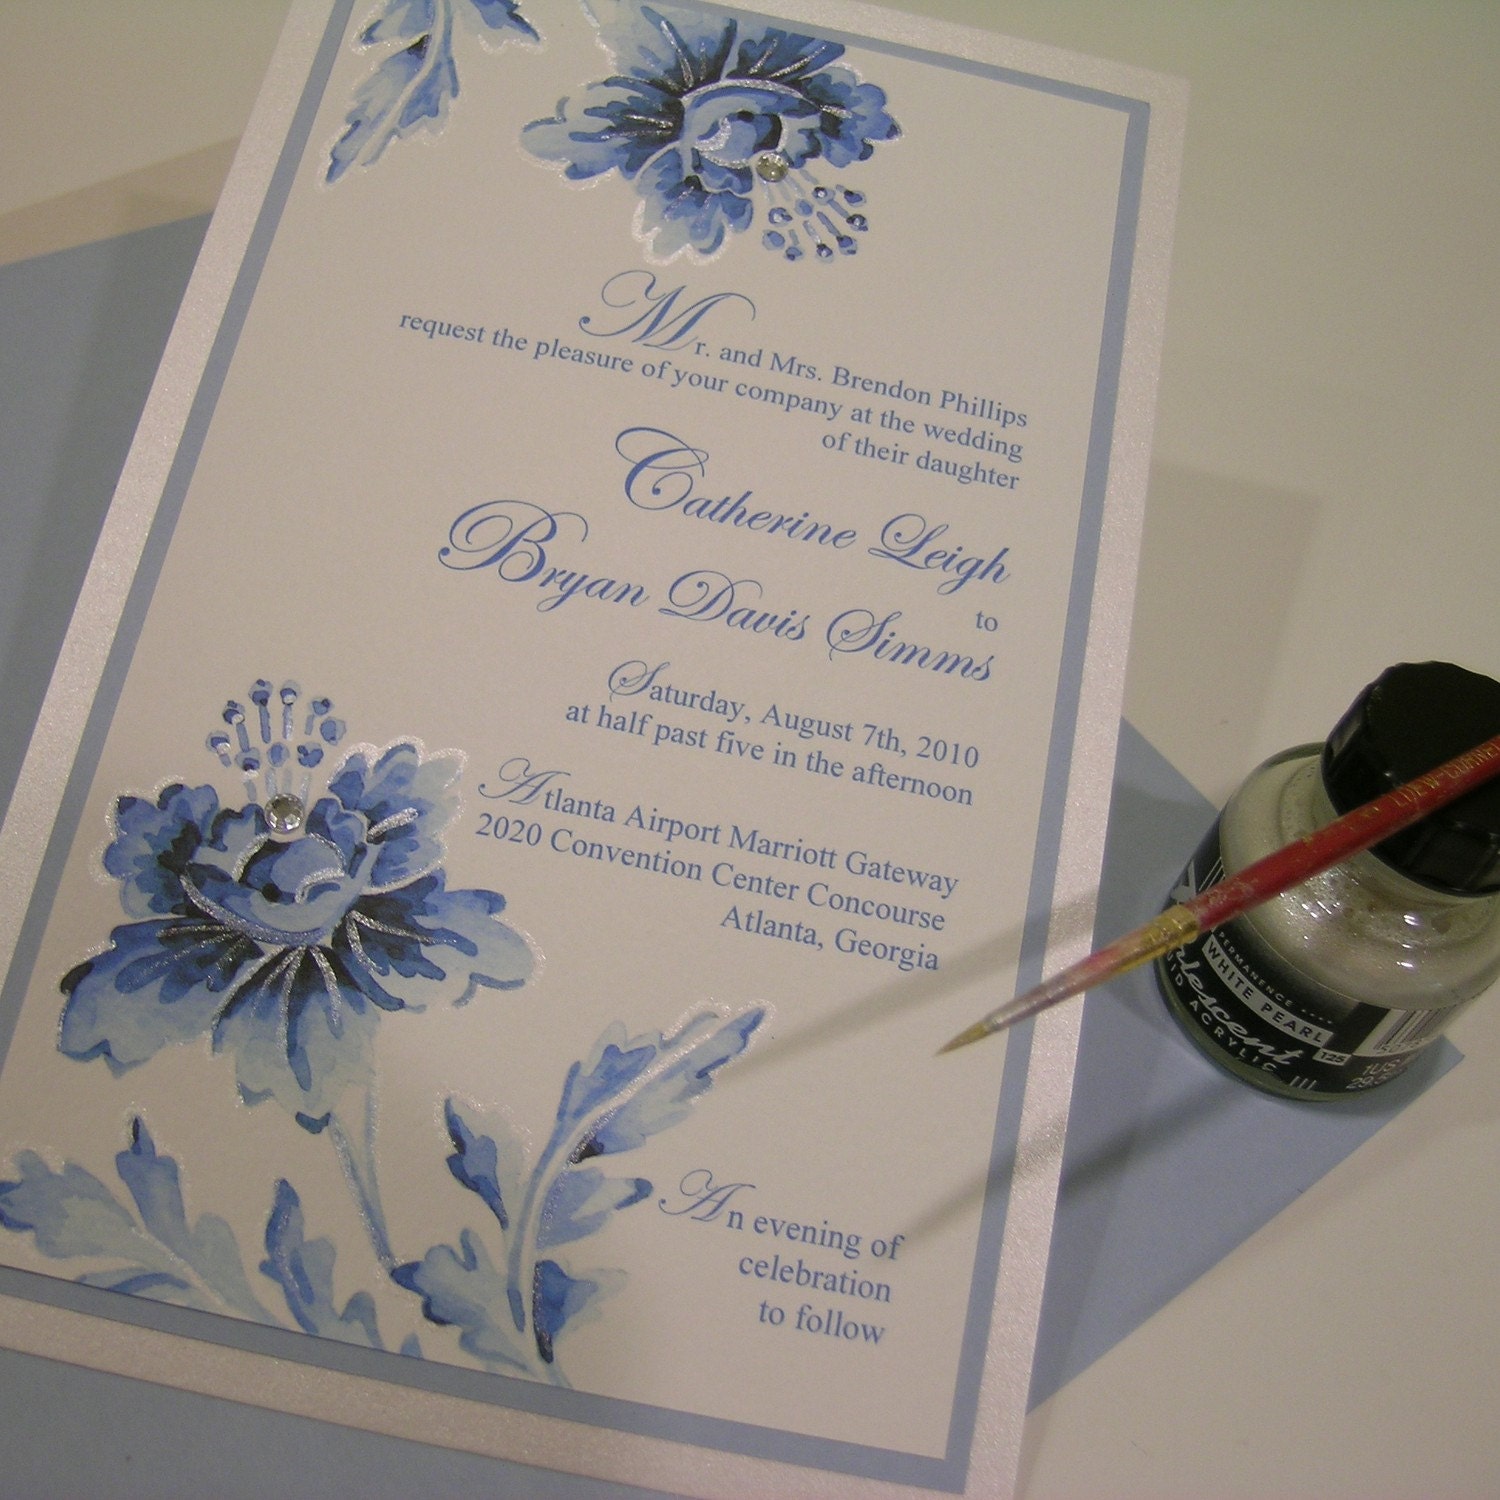 Once in a blue moon - Wedding invitation sample